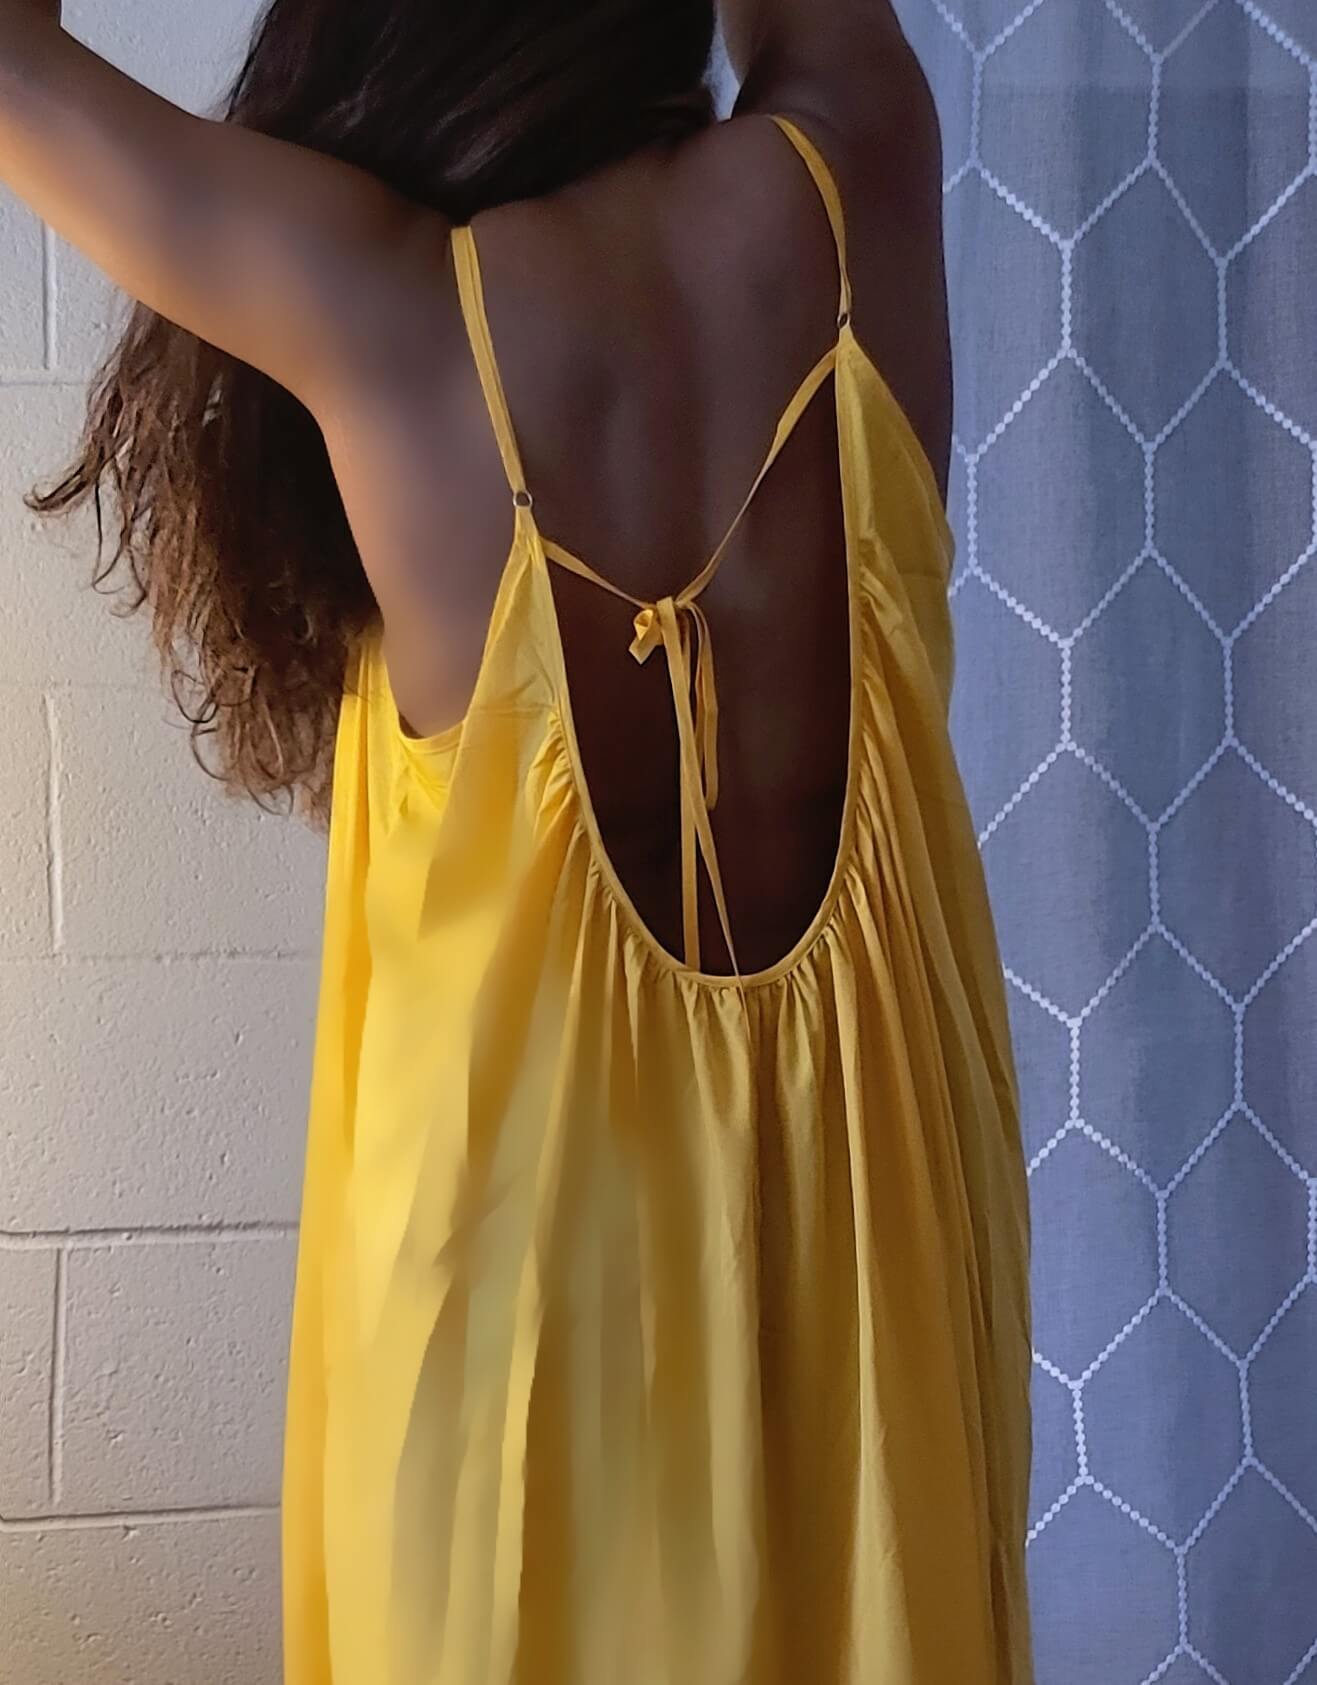 a woman in a yellow dress holding a cell phone 